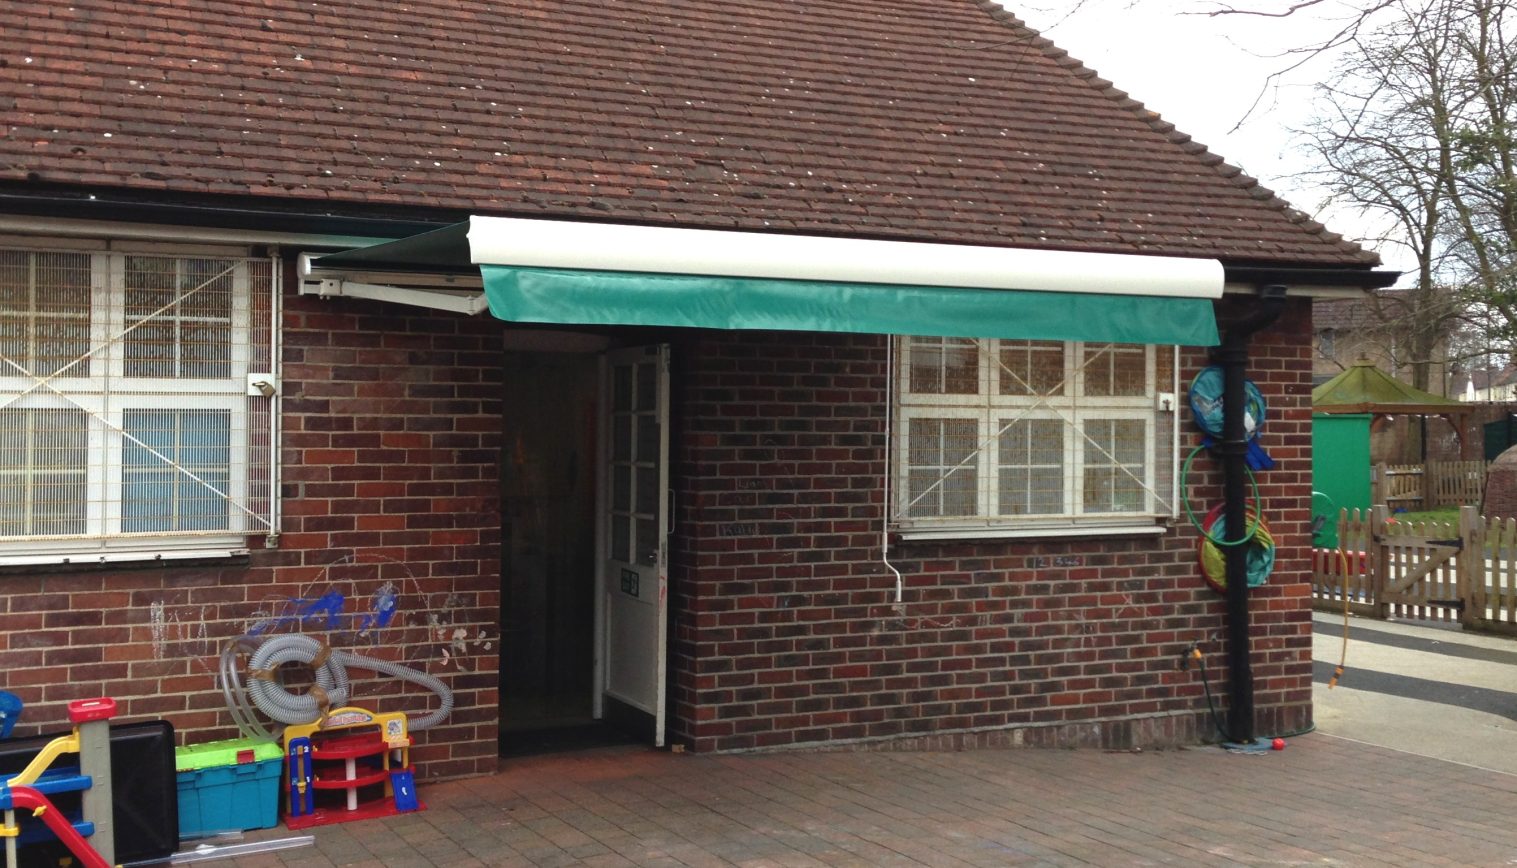 Steers Mead Children’s Centre – Commercial Awning